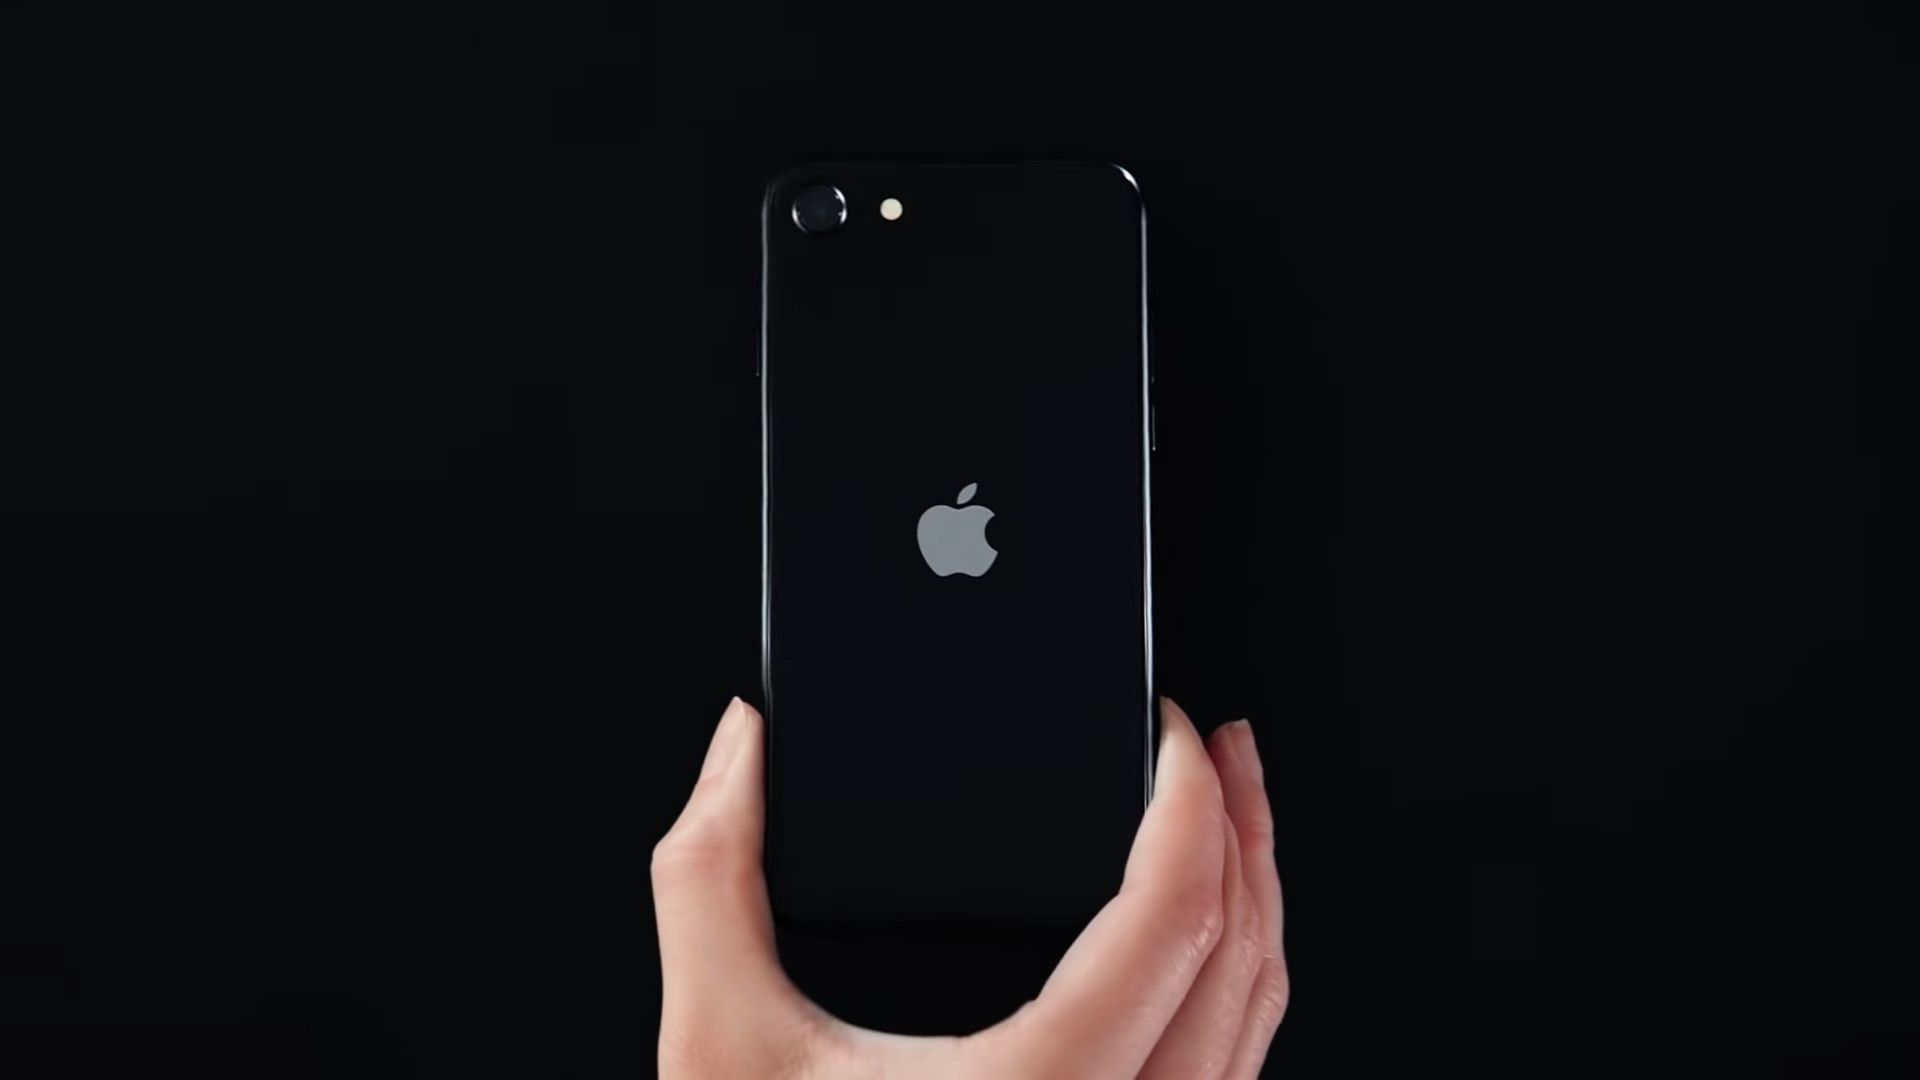 A still from an Apple ad showing a black iPhone SE (2020)